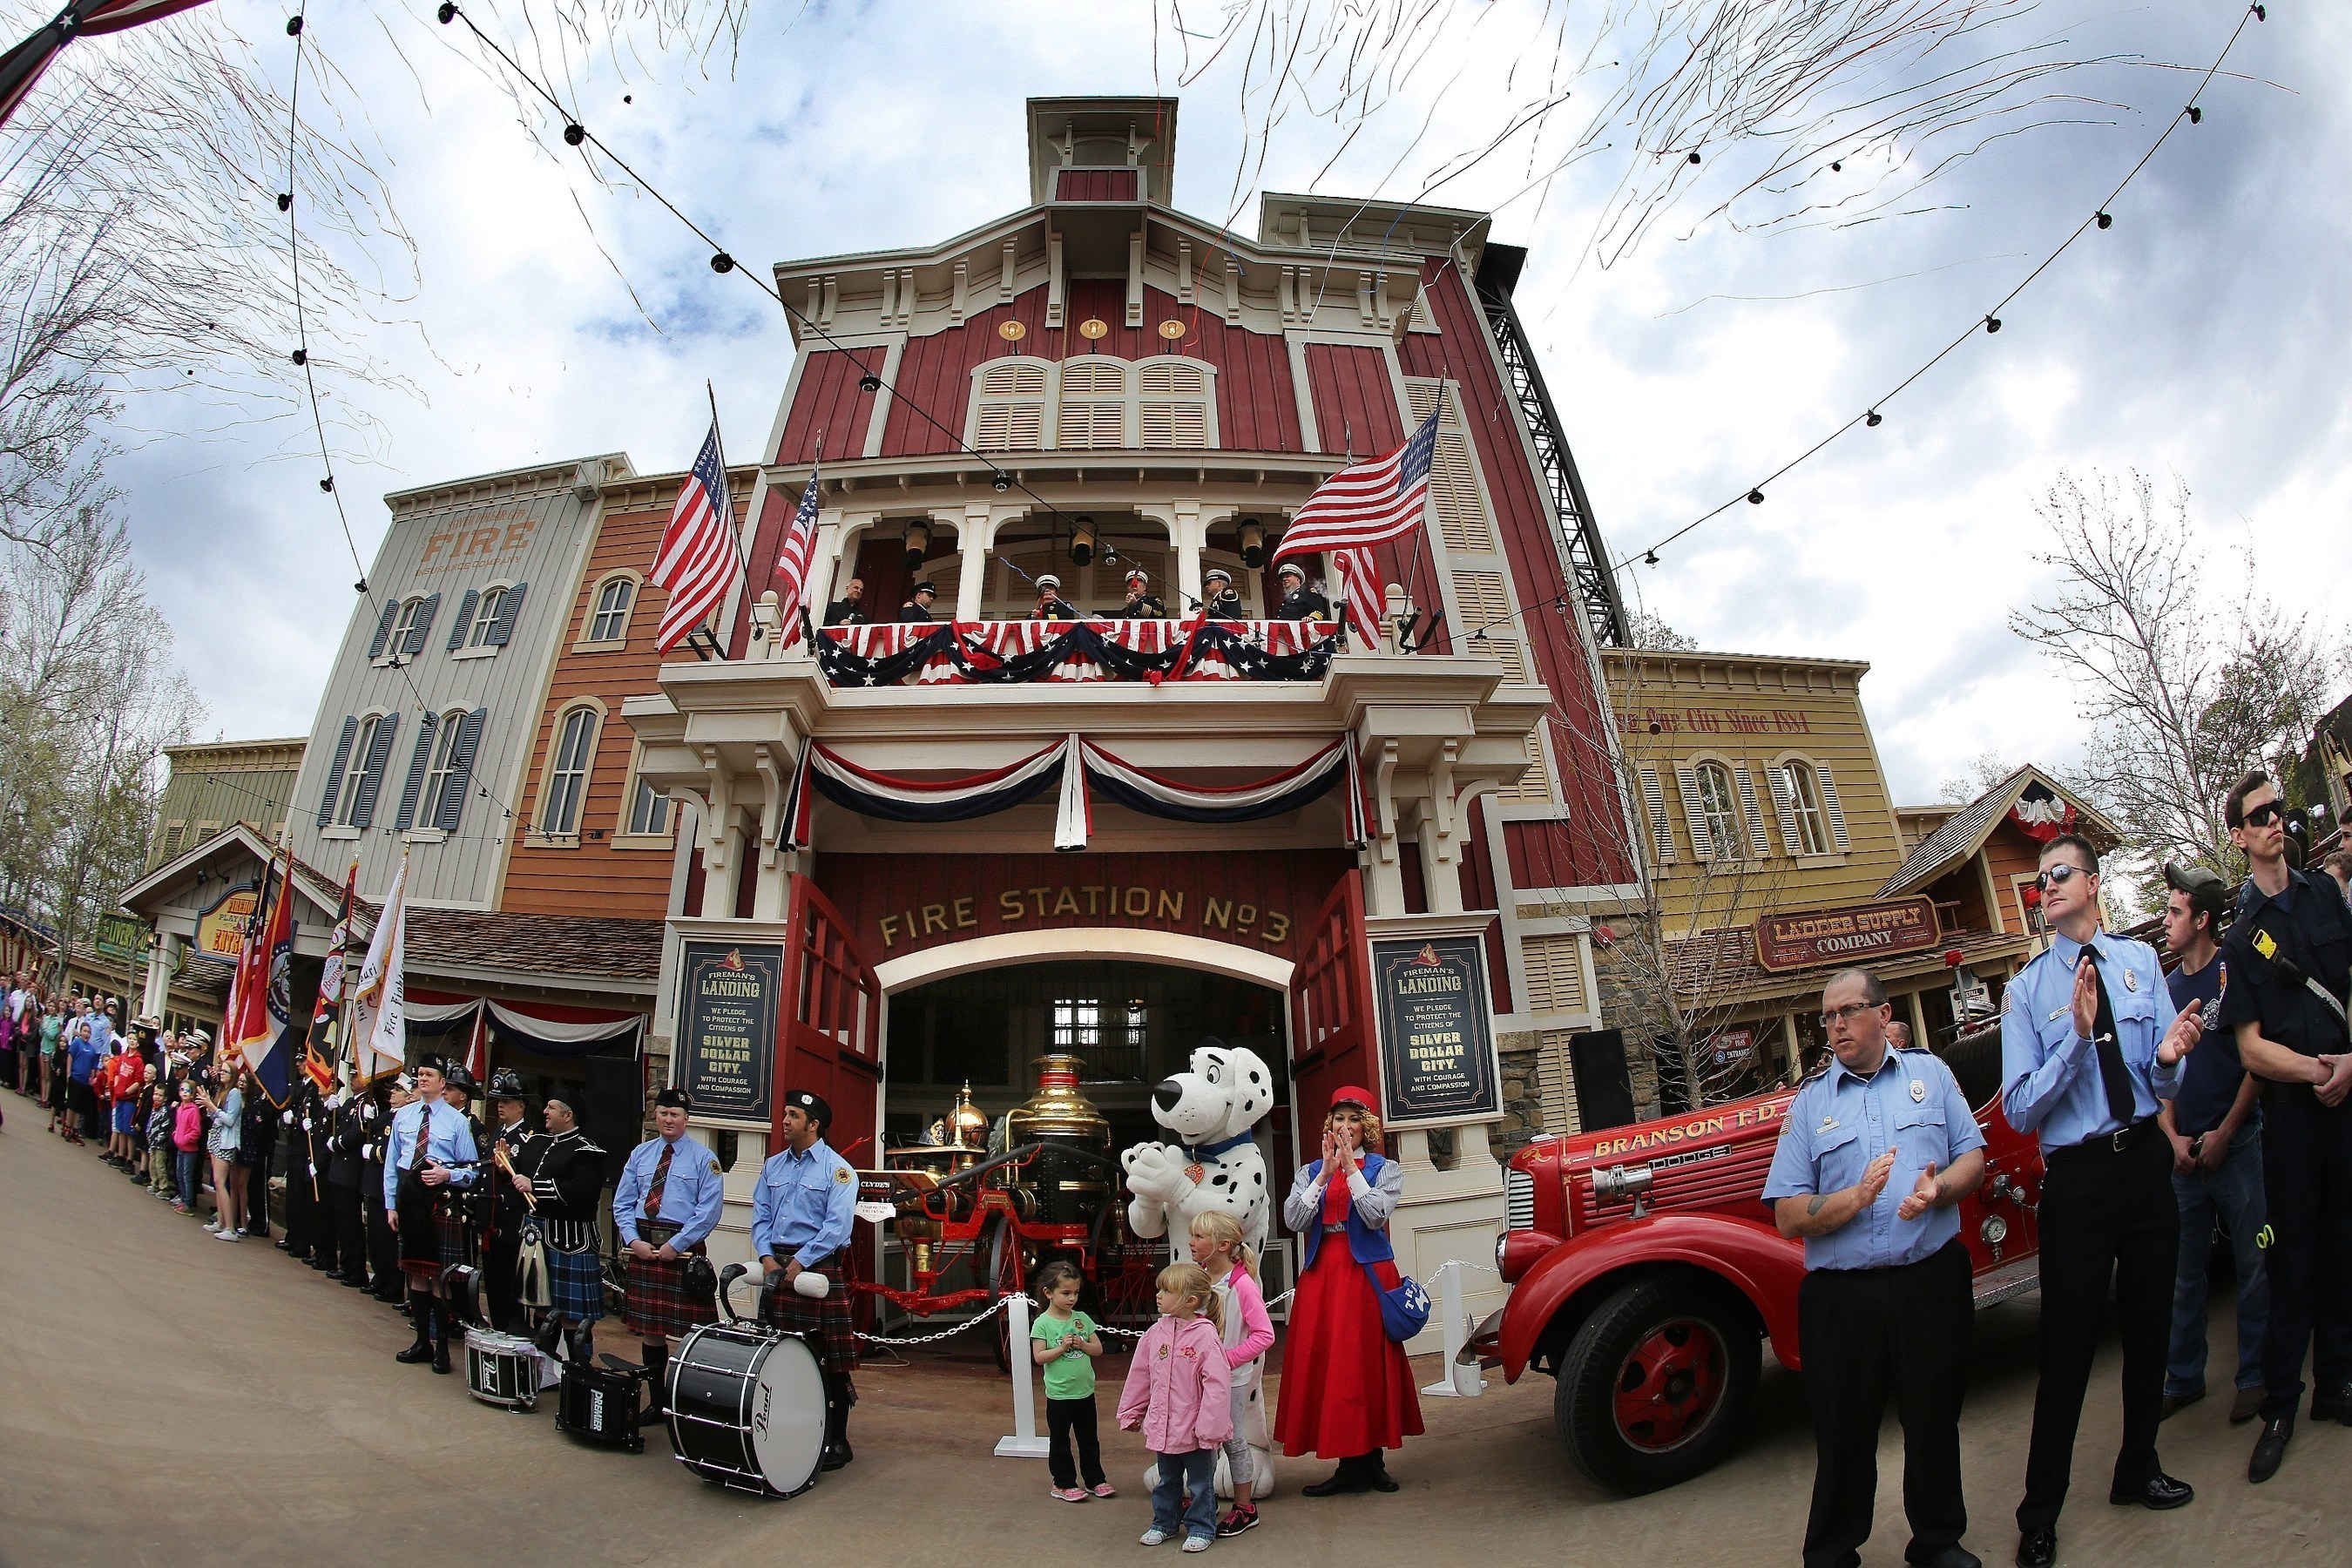 Hundreds of firefighters from around the country gather for the grand opening of Fireman's Landing, a new $8 million area at Silver Dollar City in Branson, Missouri.